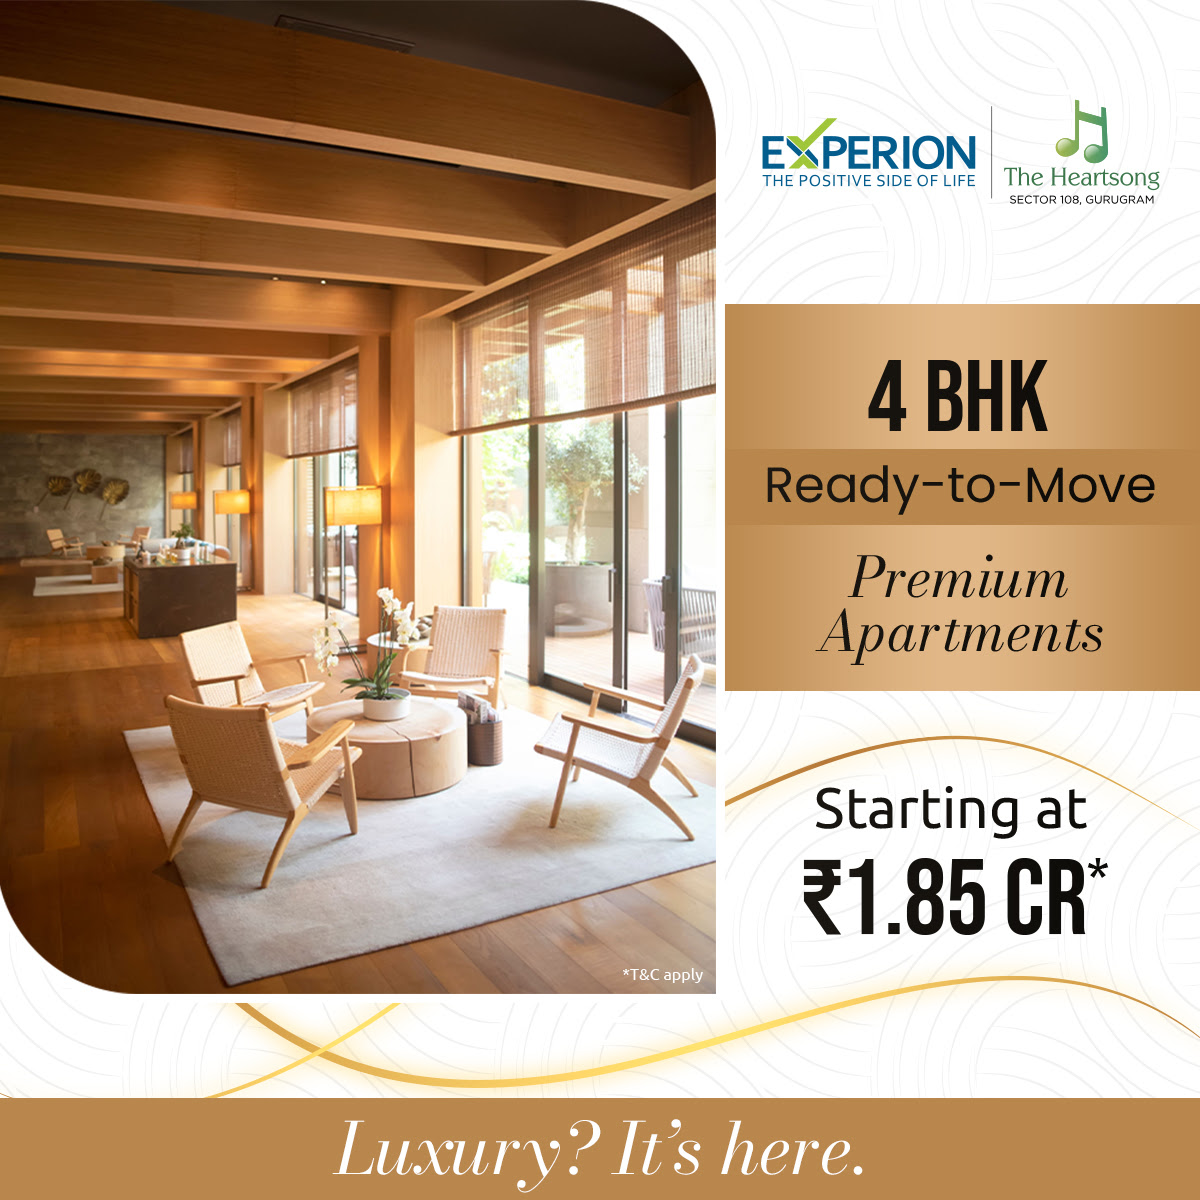 Ready to move 4 BHK premium apartments starting Rs 1.85 Cr at Experion The Heartsong, Gurgaon Update